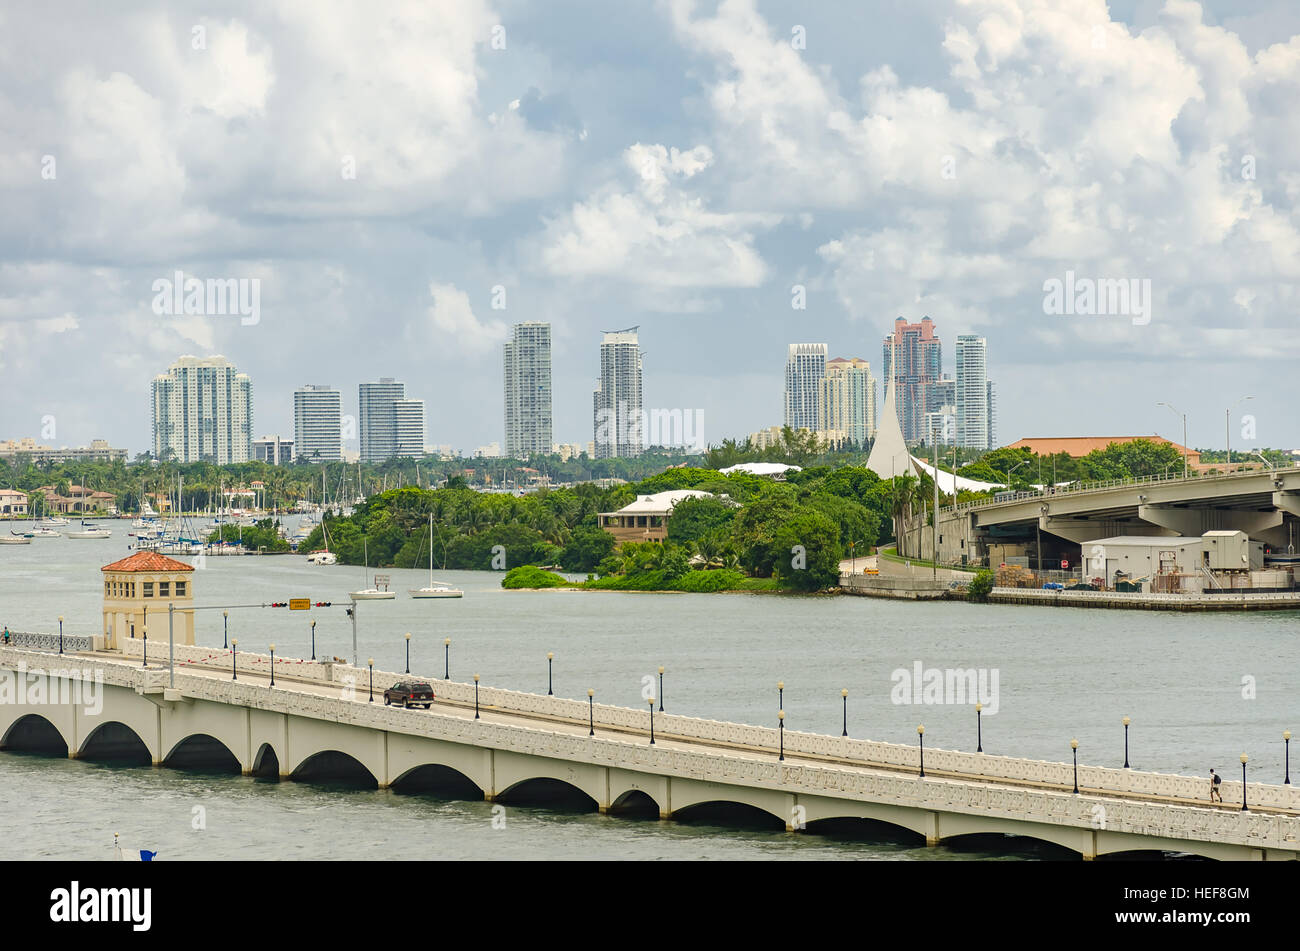 Miami, Florida, USA - October 7, 2012: Bridges and Skyline of Miami South Beach area seen from downtown in Florida Stock Photo